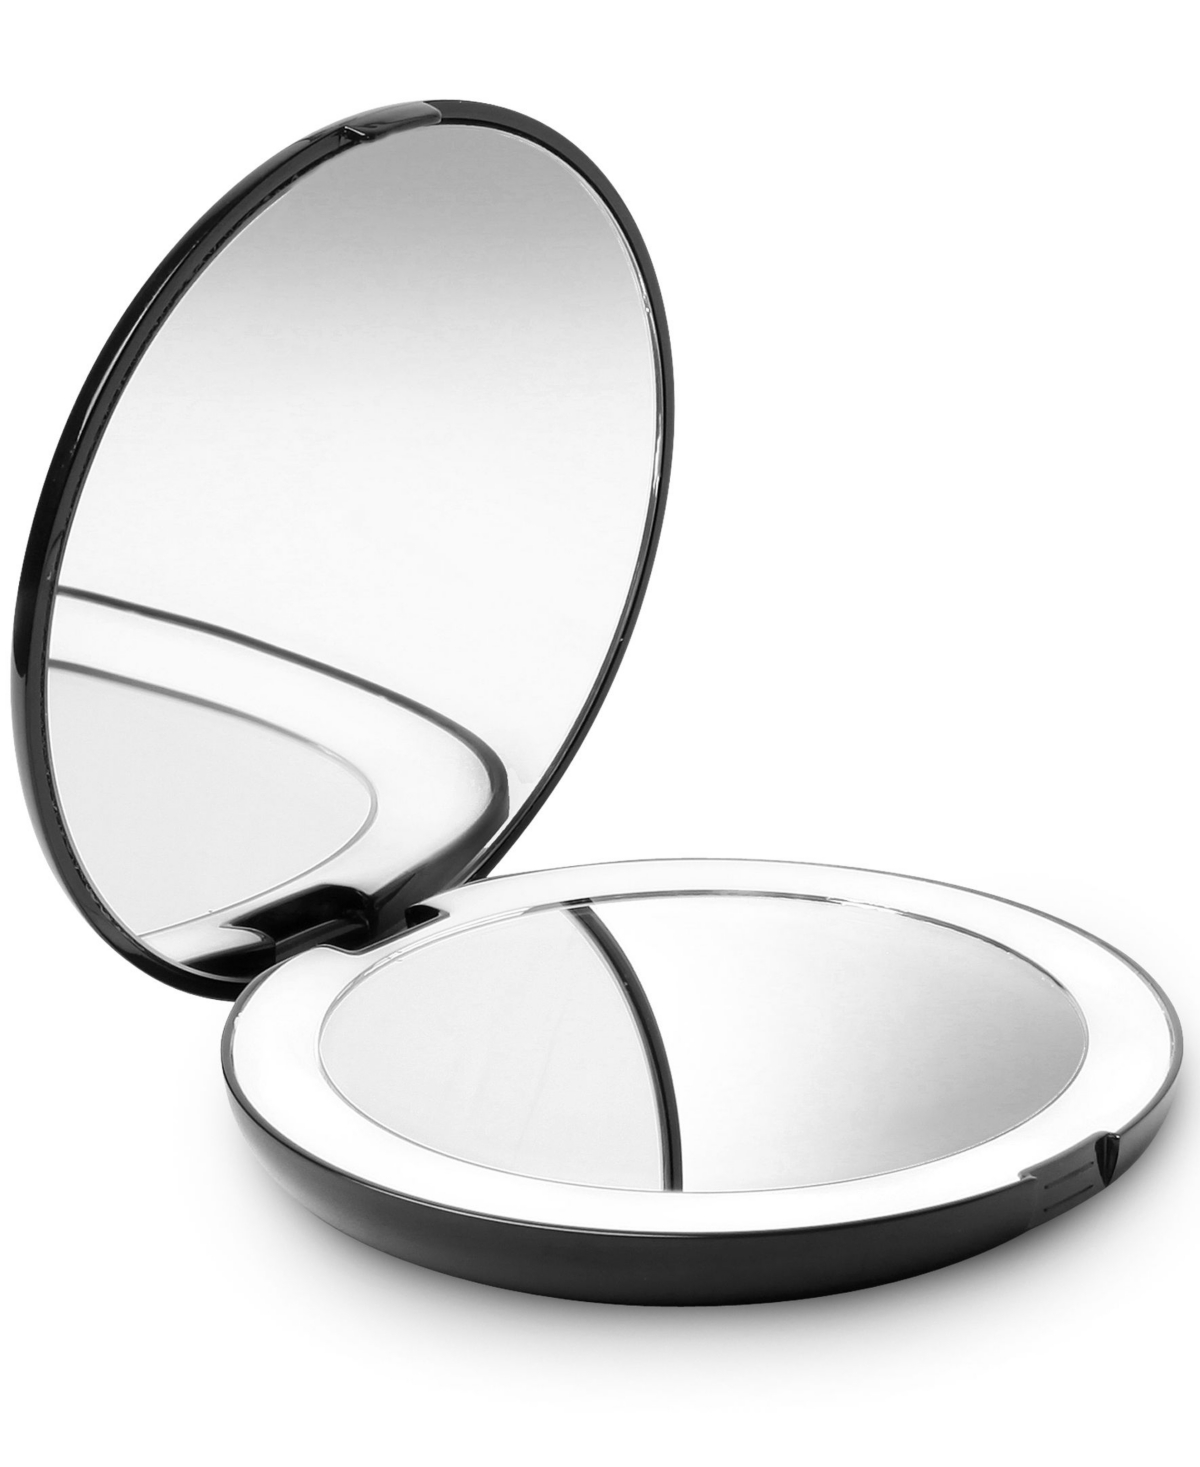 Lumi 5" Compact Mirror with Led Lights - White